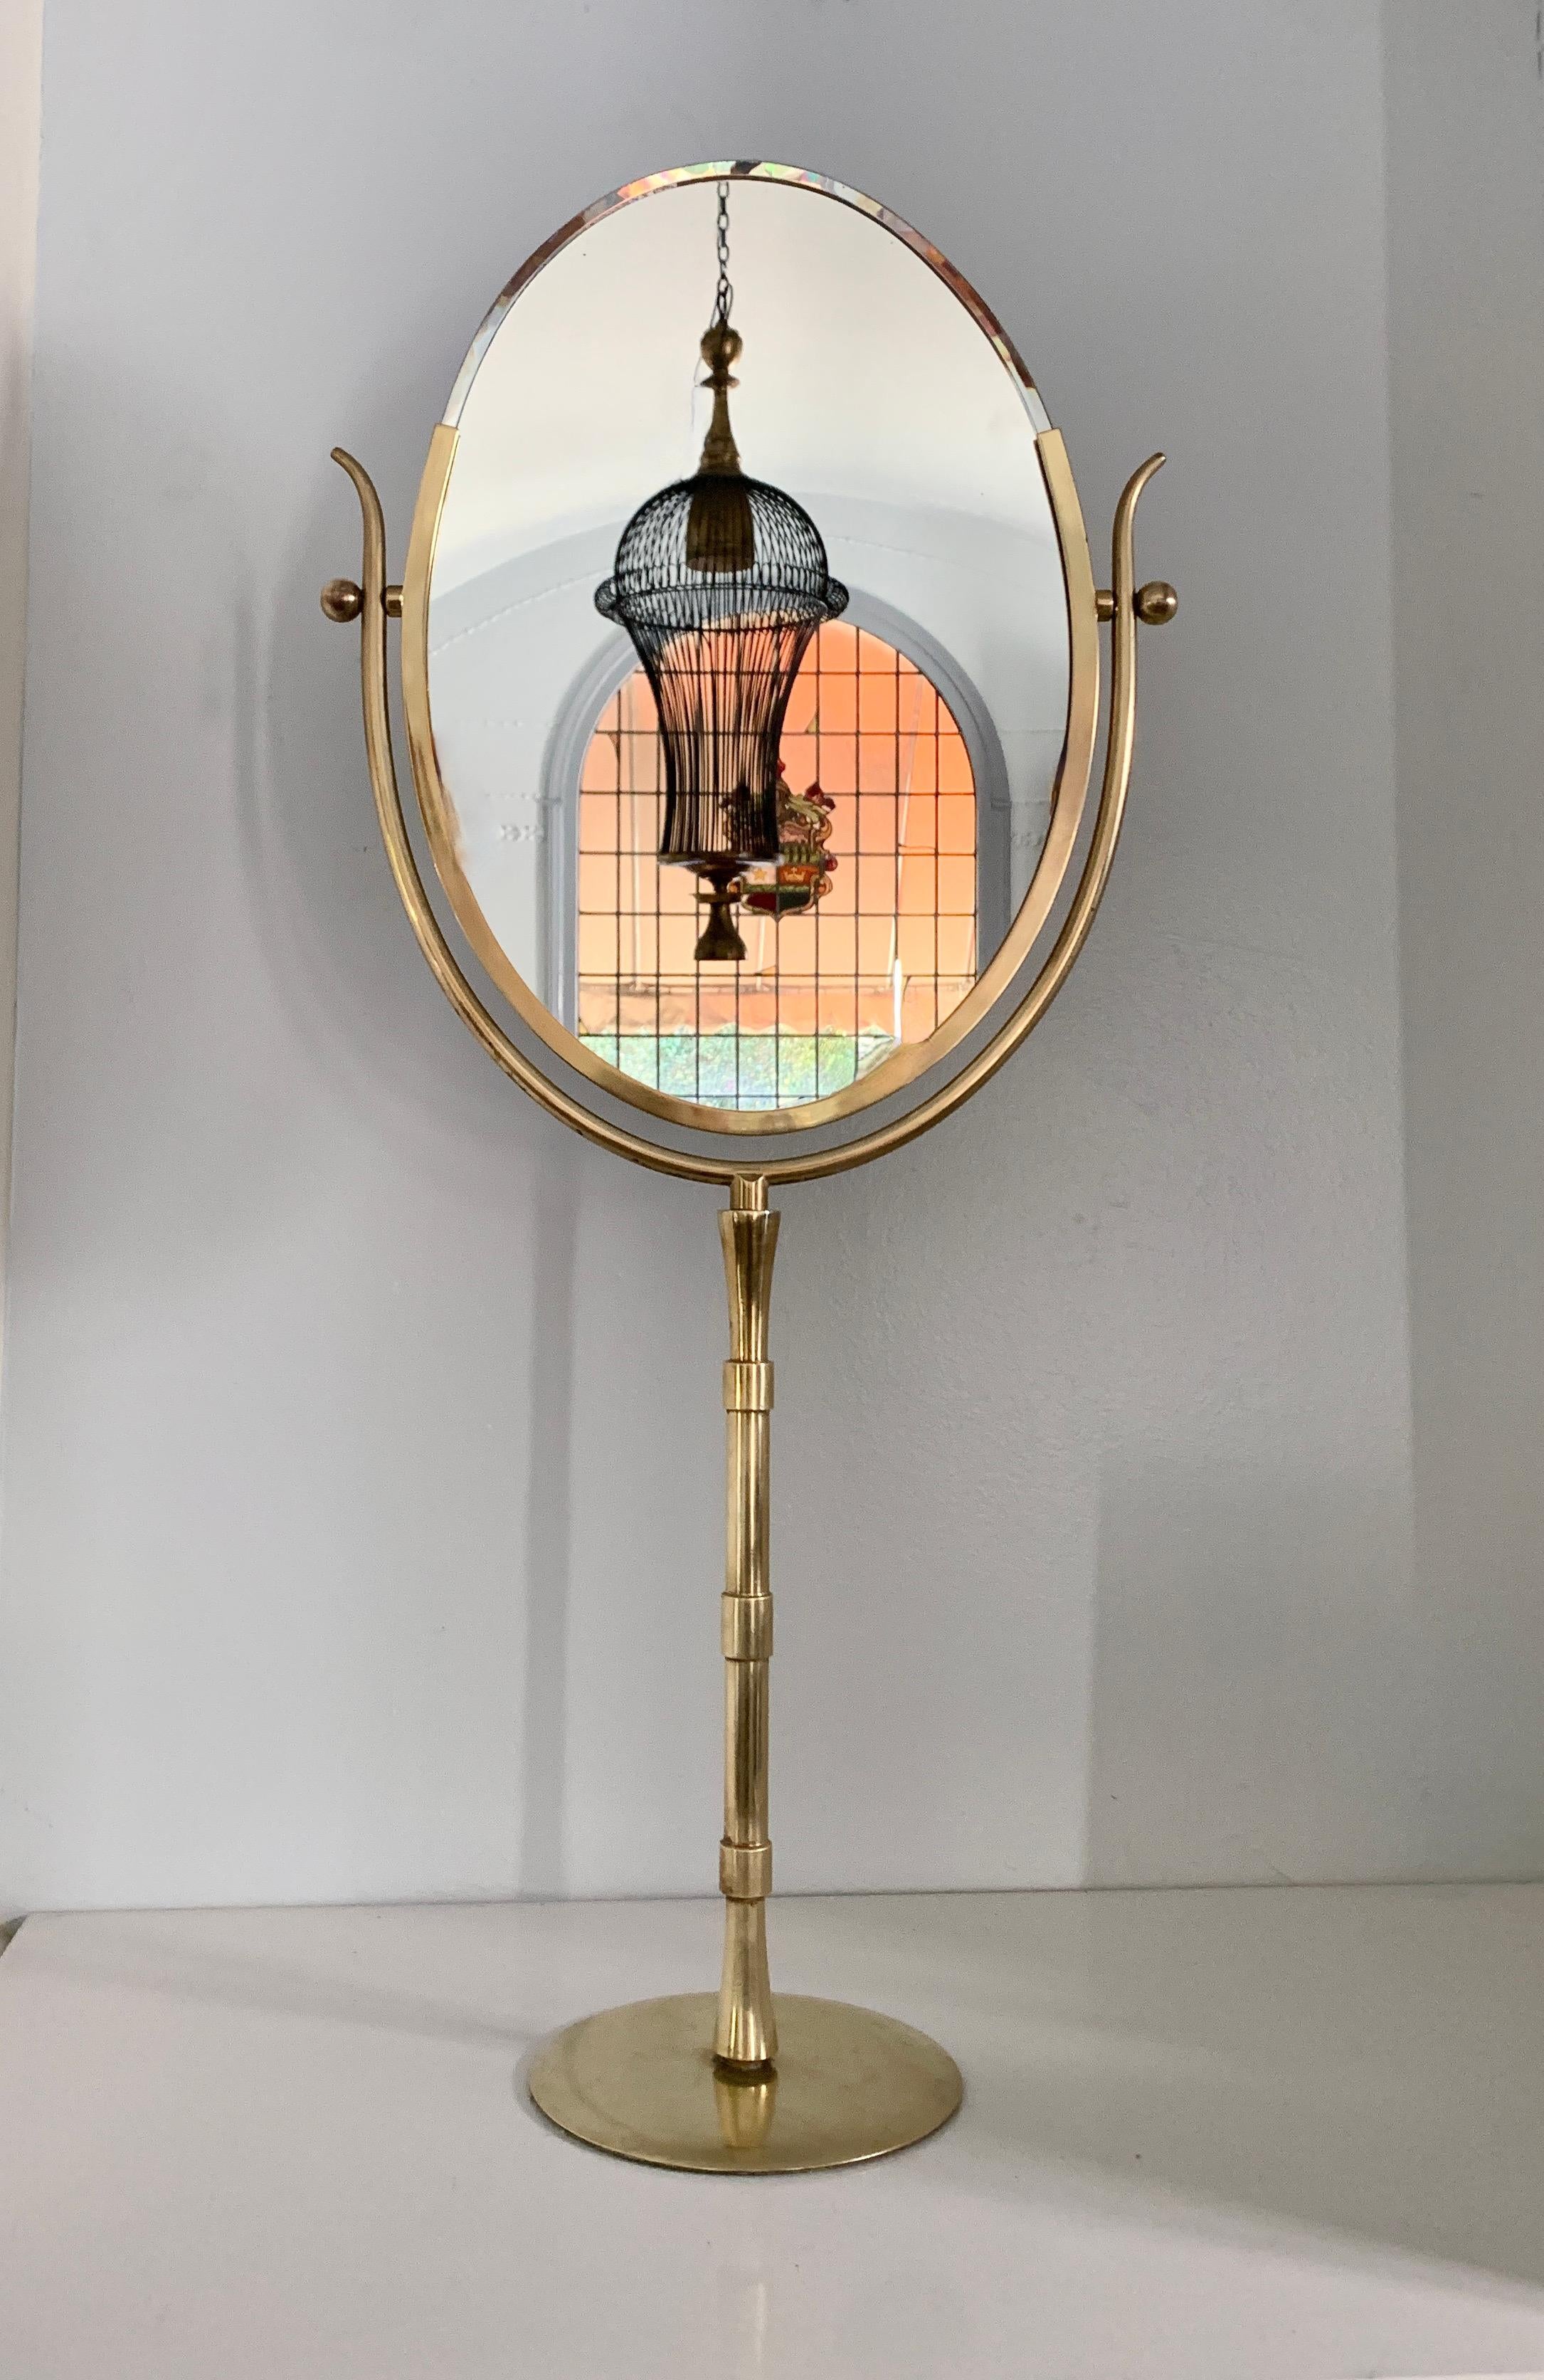 Polished Rare Charles Hollis Jones Brass Glamour Vanity or Table Mirror For Sale